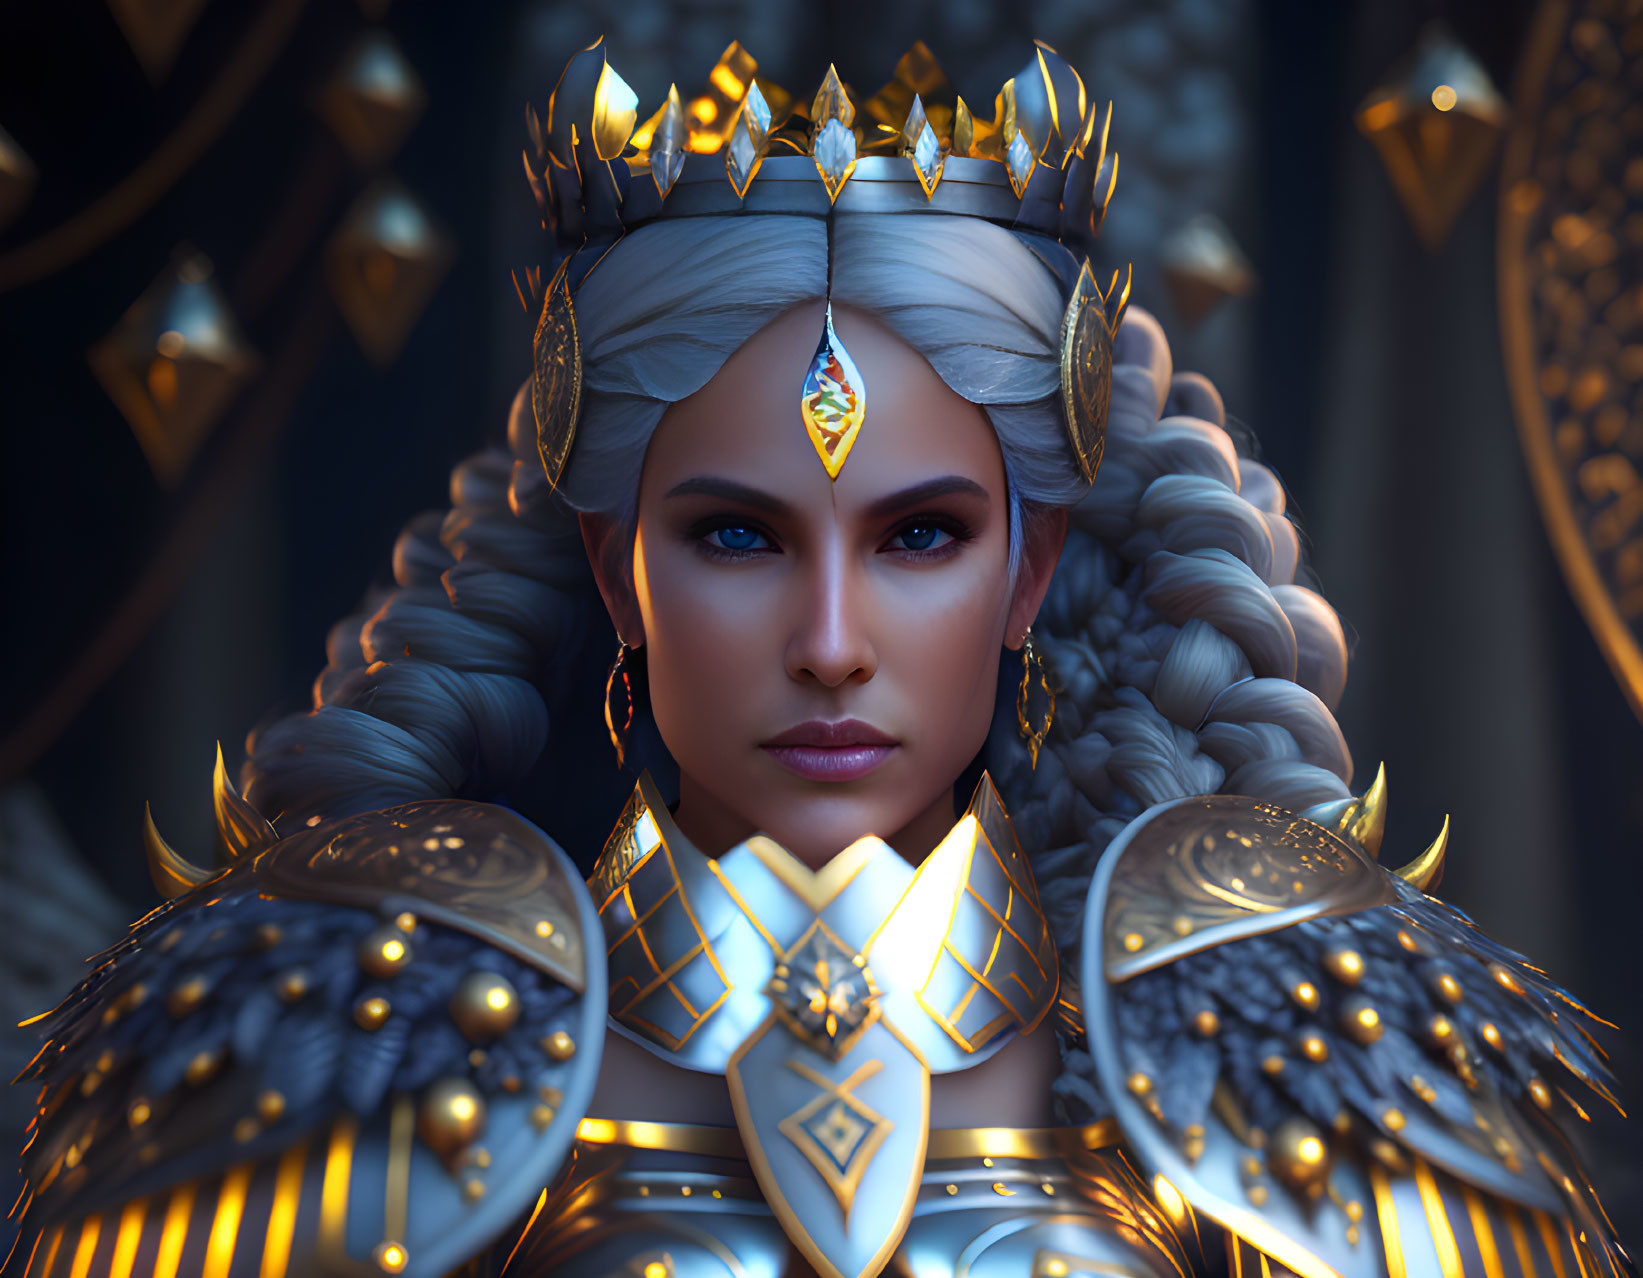 Regal woman with braided hair and golden crown in blue and gold armor